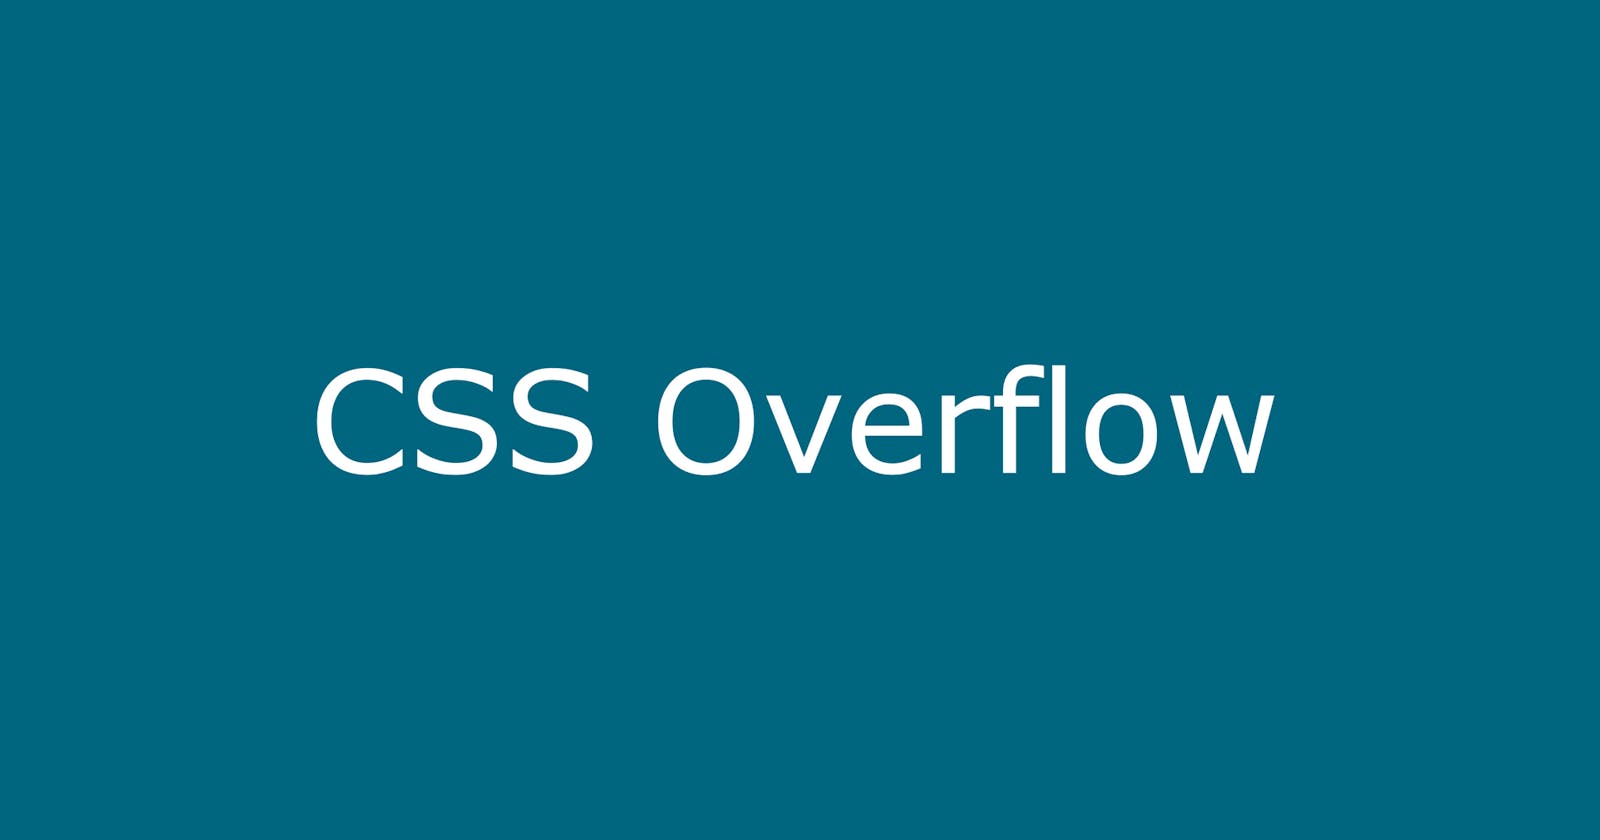 [CSS] Overflow - Explained with Examples.